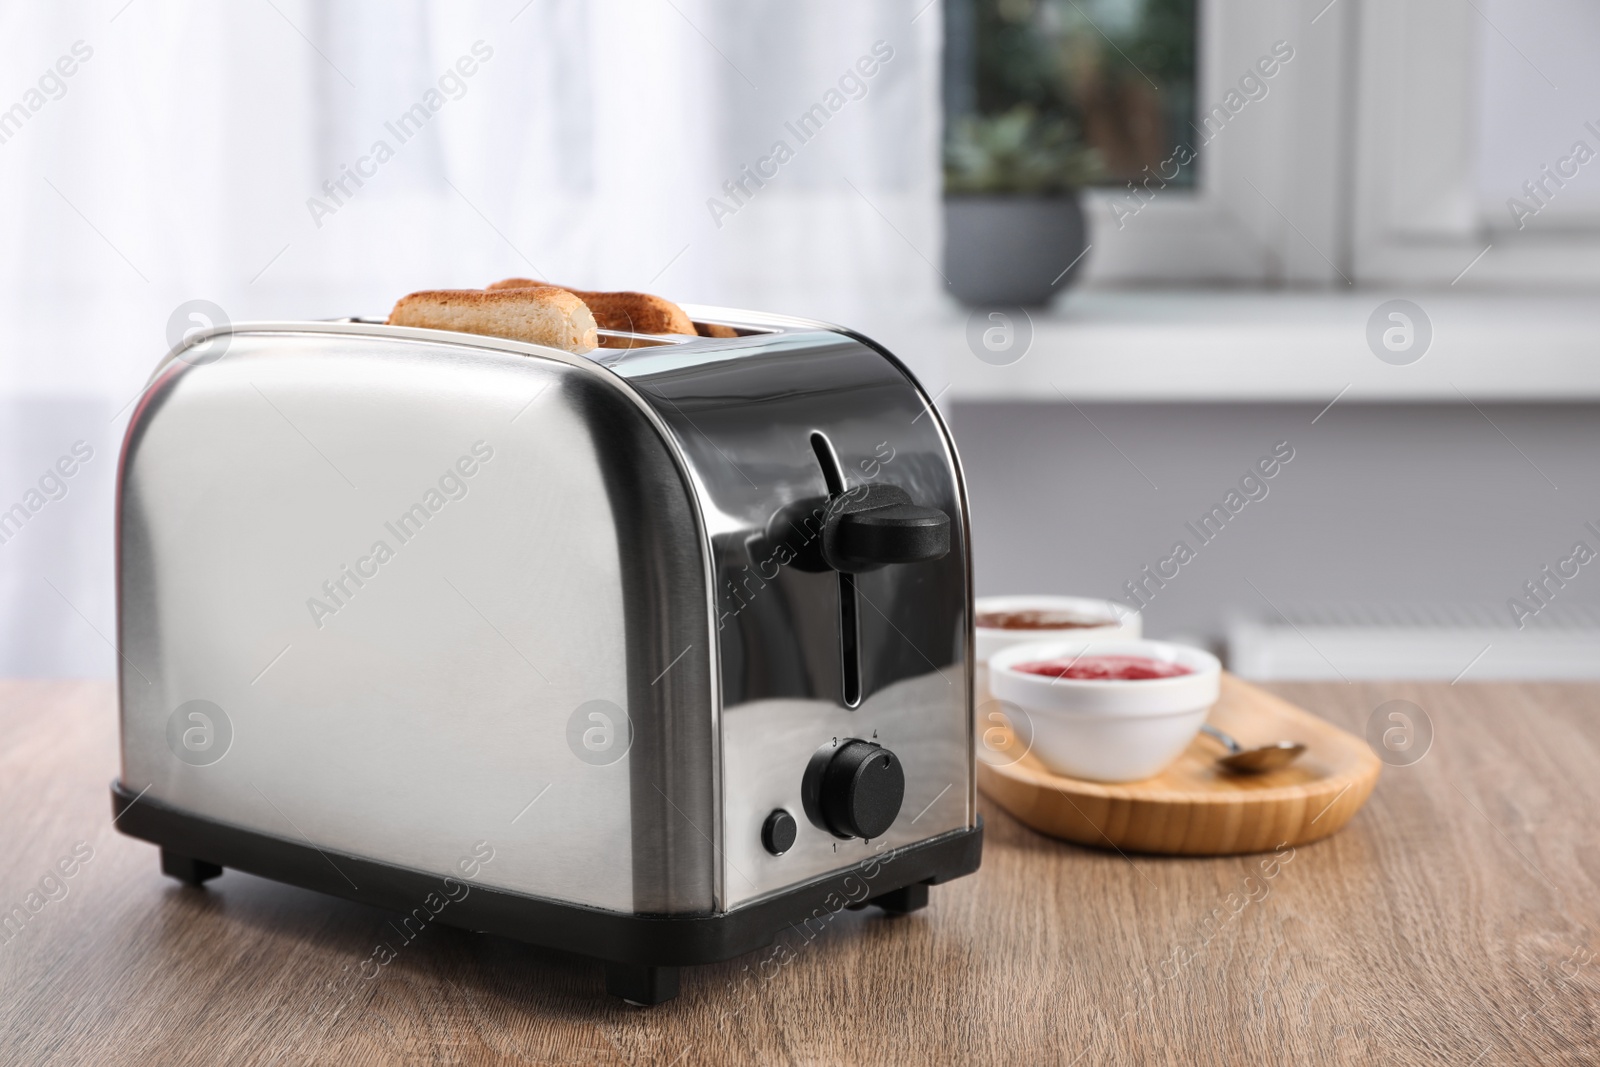 Photo of Toaster with roasted bread and jam on wooden table, space for text